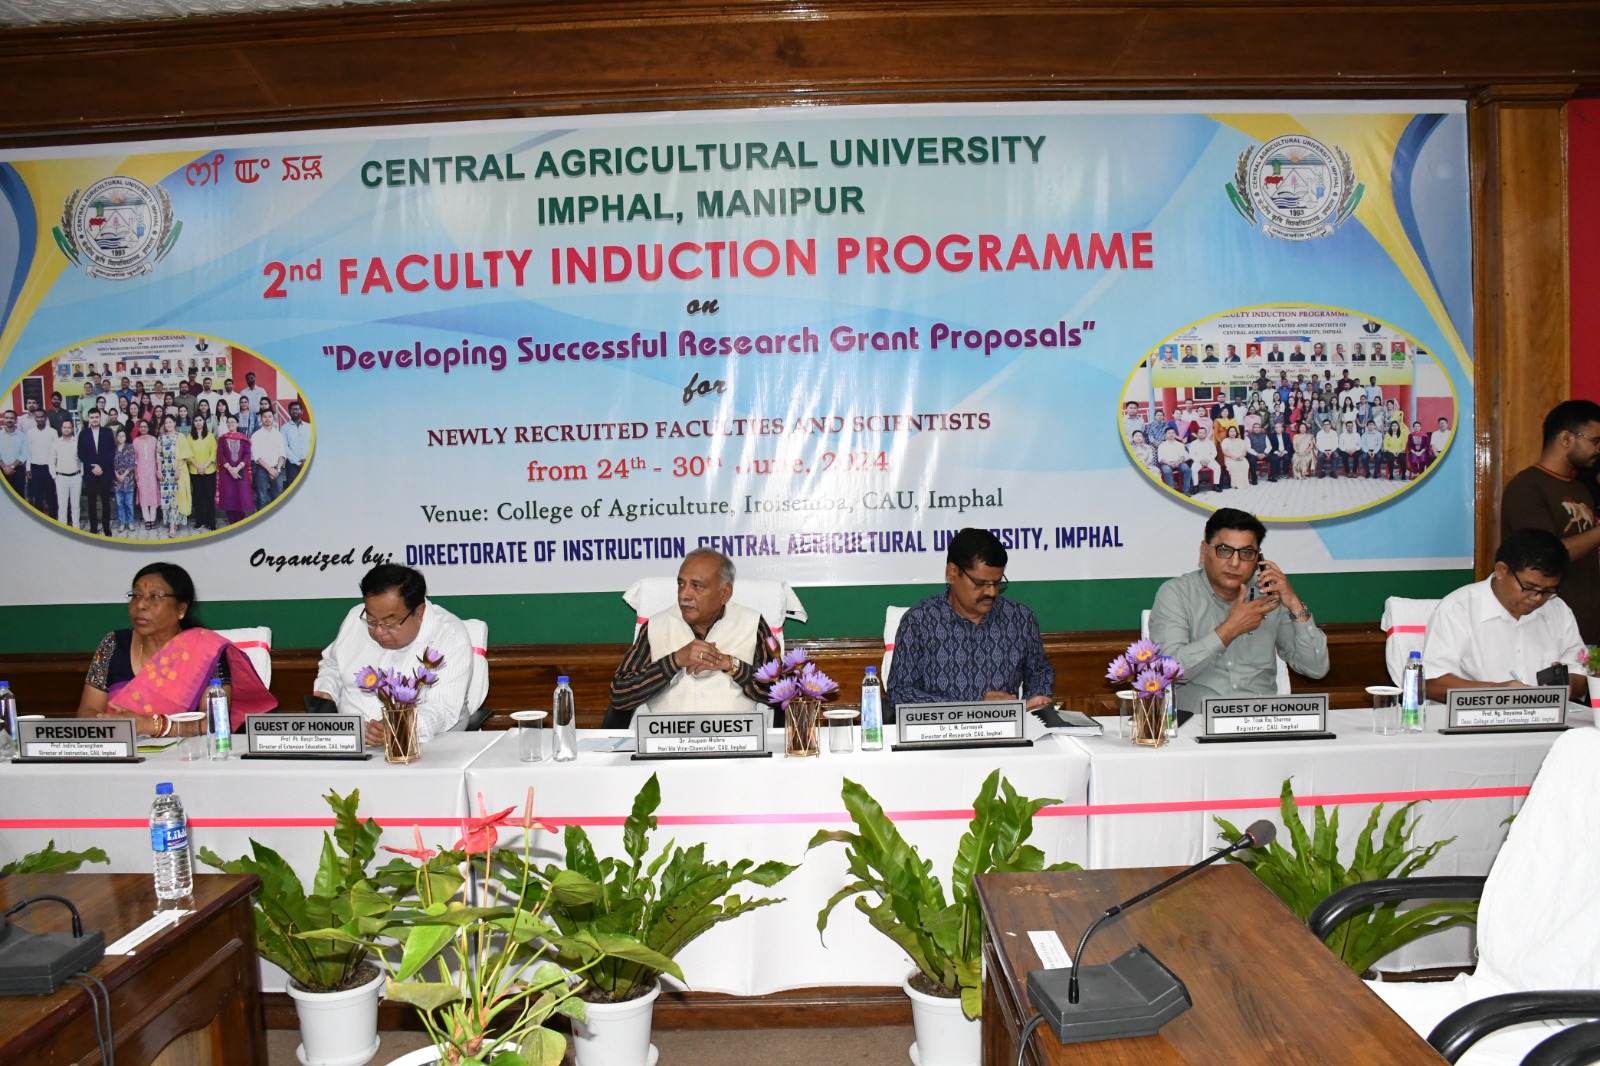 The Valedictory Session of the 2nd Faculty Induction Programme at COA Imphal